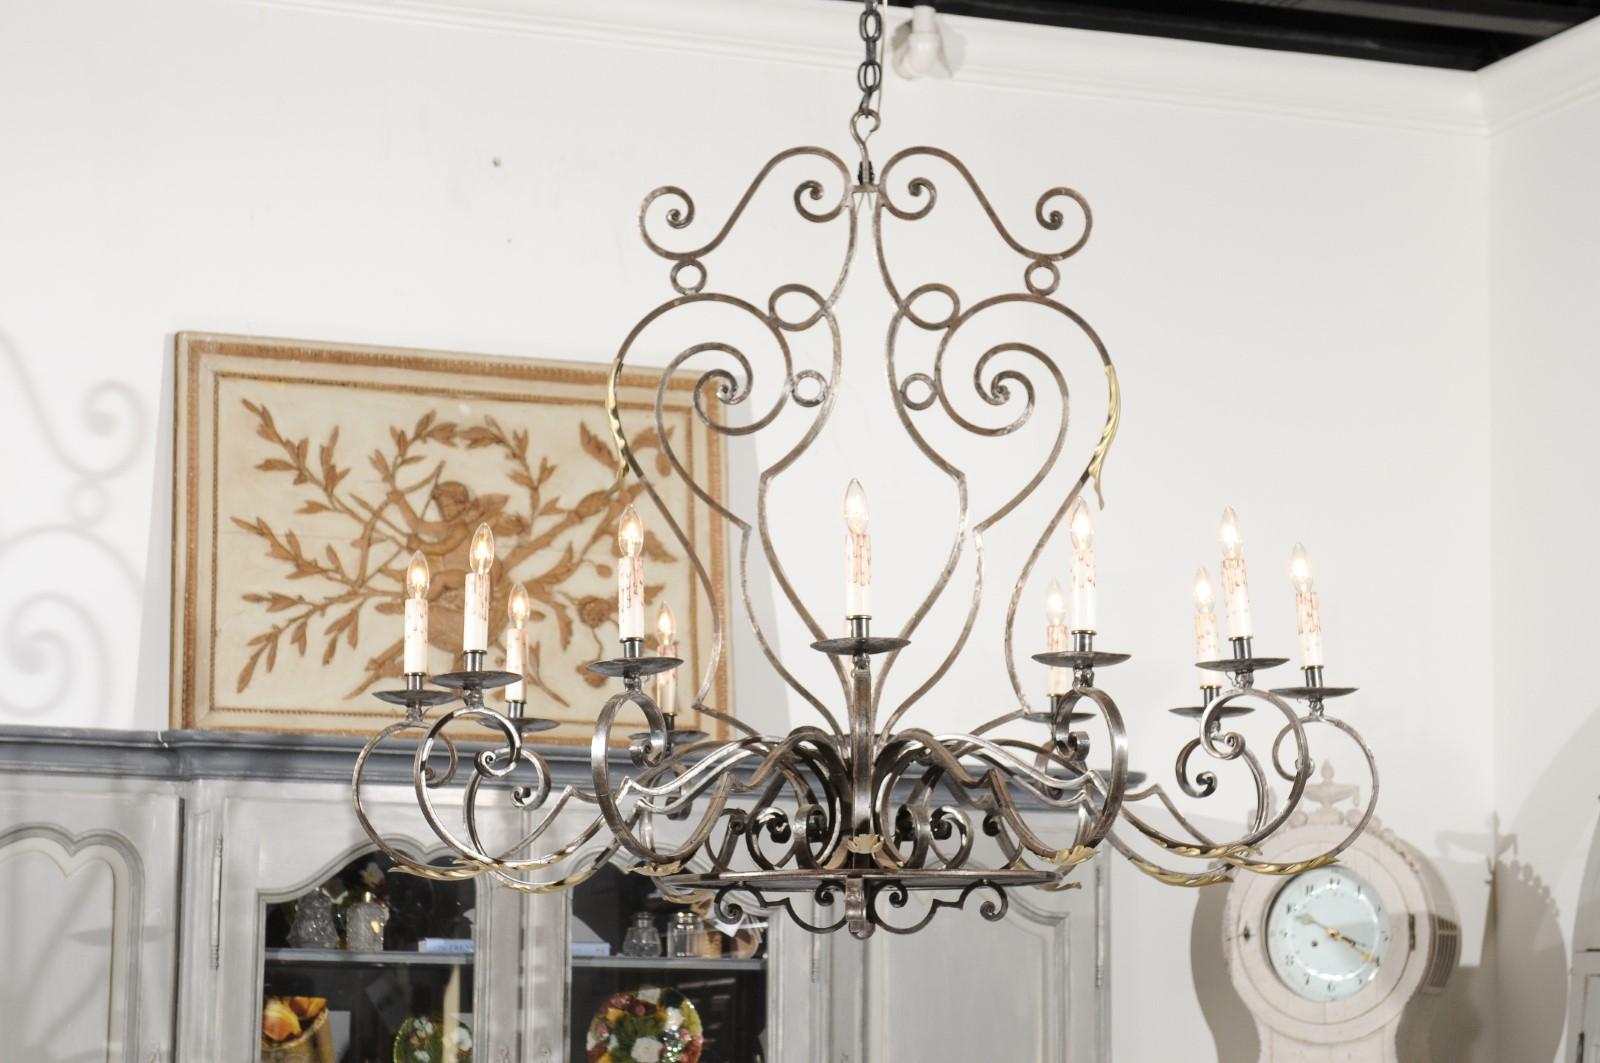 SOLD A French 12-light wrought-iron chandelier from the 20th century, with scrolling accents and acanthus leaves. Created in France during the 20th century, this vintage chandelier features a beautifully scrolling wrought-iron armature discreetly